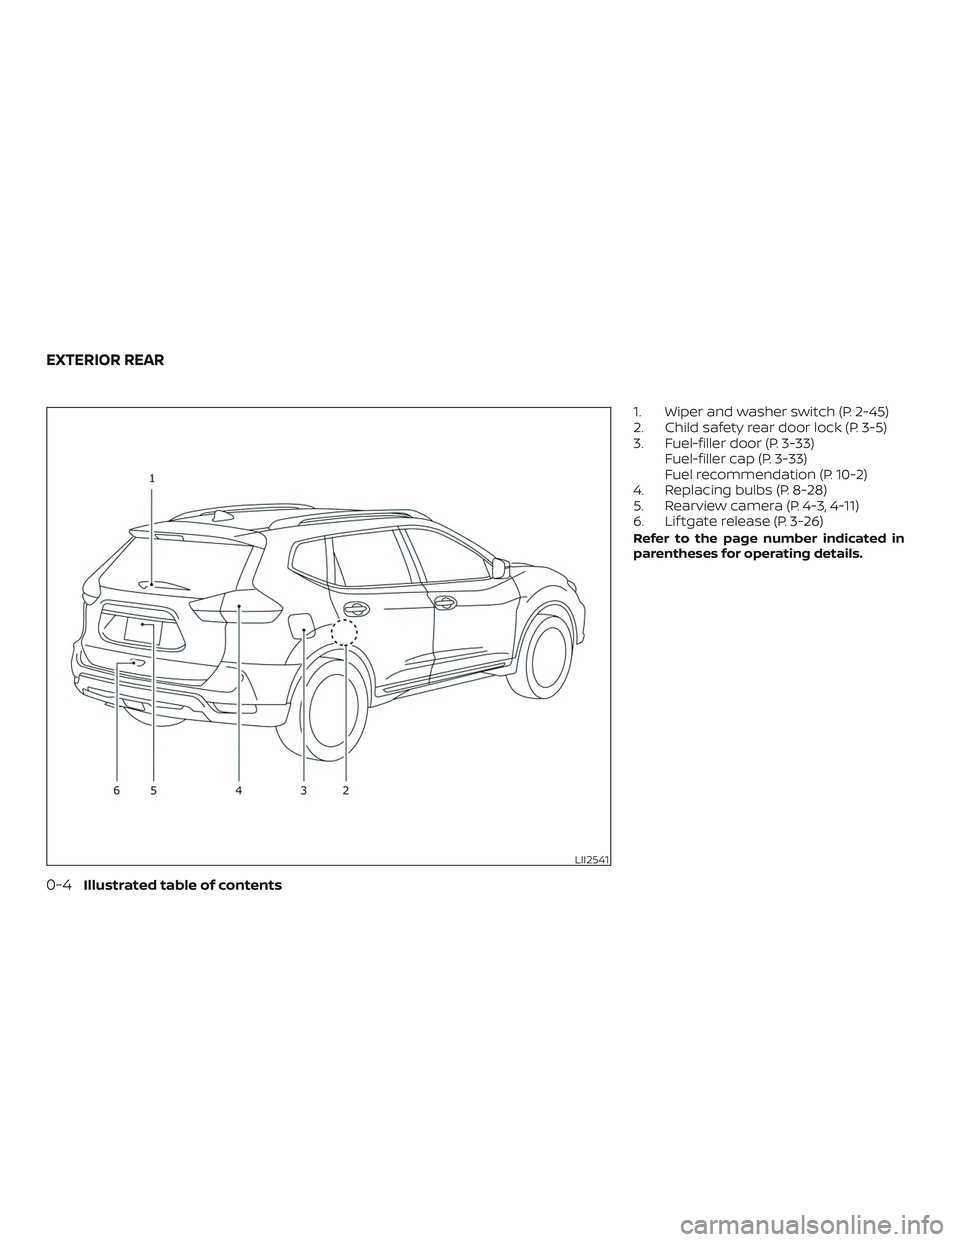 NISSAN ROGUE 2020  Owner´s Manual 1. Wiper and washer switch (P. 2-45)
2. Child safety rear door lock (P. 3-5)
3. Fuel-filler door (P. 3-33)Fuel-filler cap (P. 3-33)
Fuel recommendation (P. 10-2)
4. Replacing bulbs (P. 8-28)
5. Rearvi